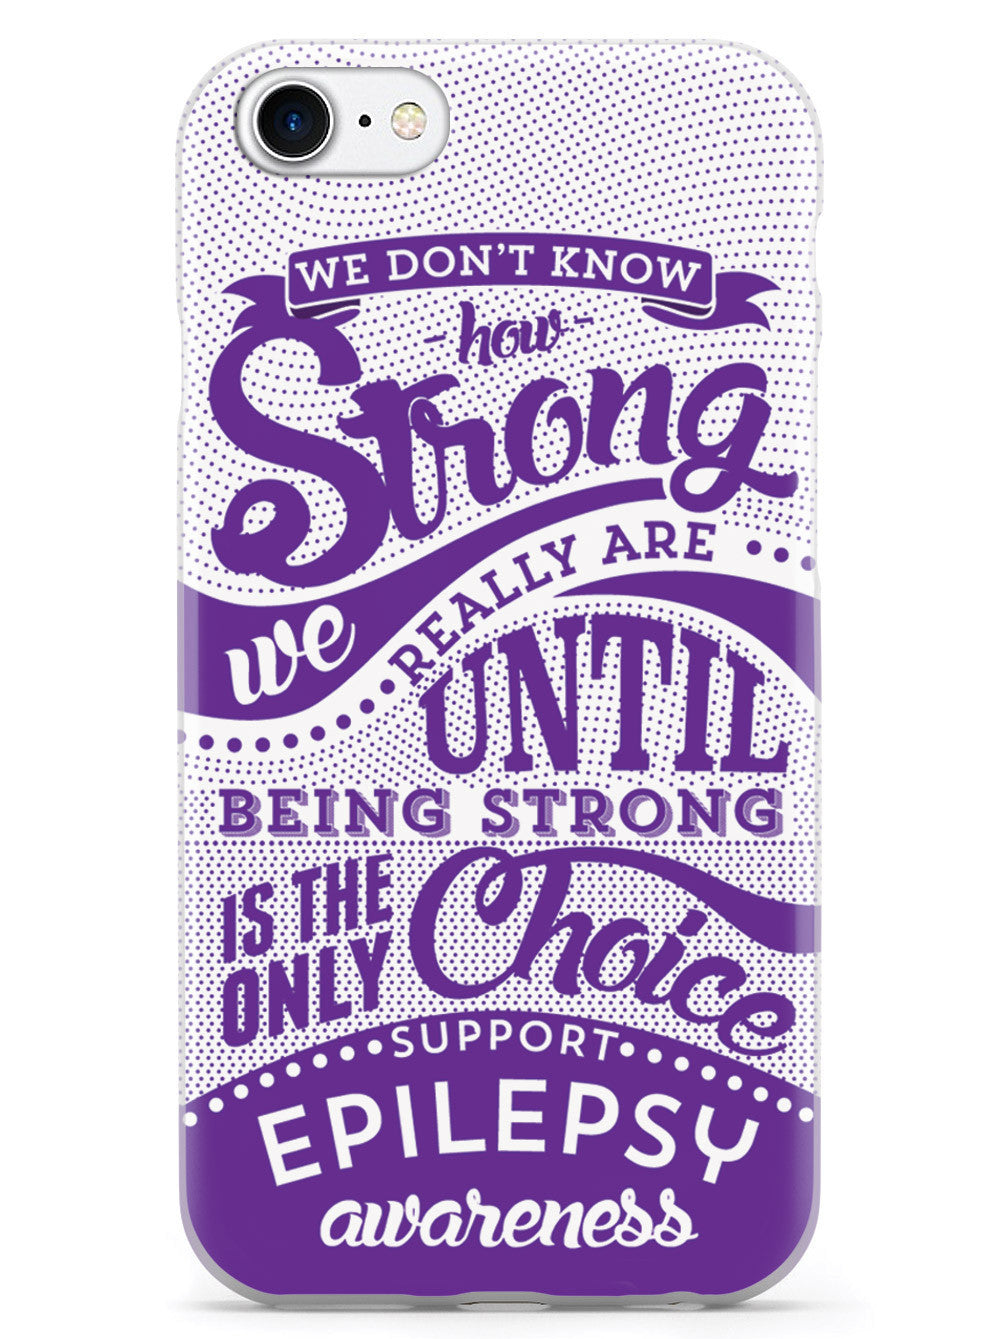 How Strong - Epilepsy Awareness Case